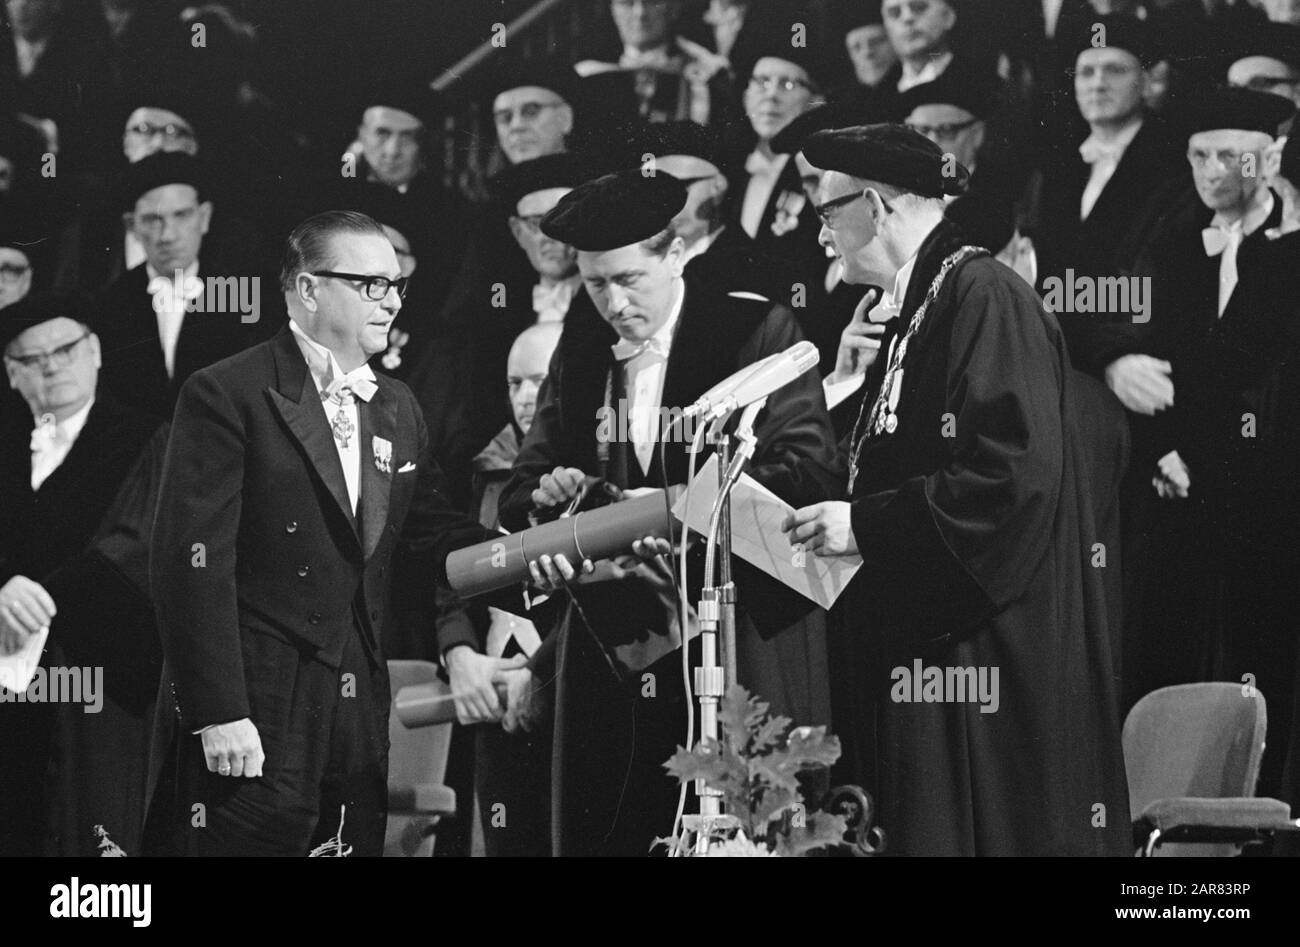 Honorary doctorates of the Vrije Universiteit in the Concertgebouw in Amsterdam  Prof. mr. De Gaay Fortman while he gave to His Excellency Mr. E. Jonckheer, Prime Minister of the Dutch Antilles, the doctorate for the honorary doctorate in law awards Date: 20 October 1965 Location: Amsterdam, Noord-Holland Keywords: honorary doctorates, ministers-presidents, ceremonies Personal name: De Gaay Fortman, W.F., Jonckheer, E. Stock Photo